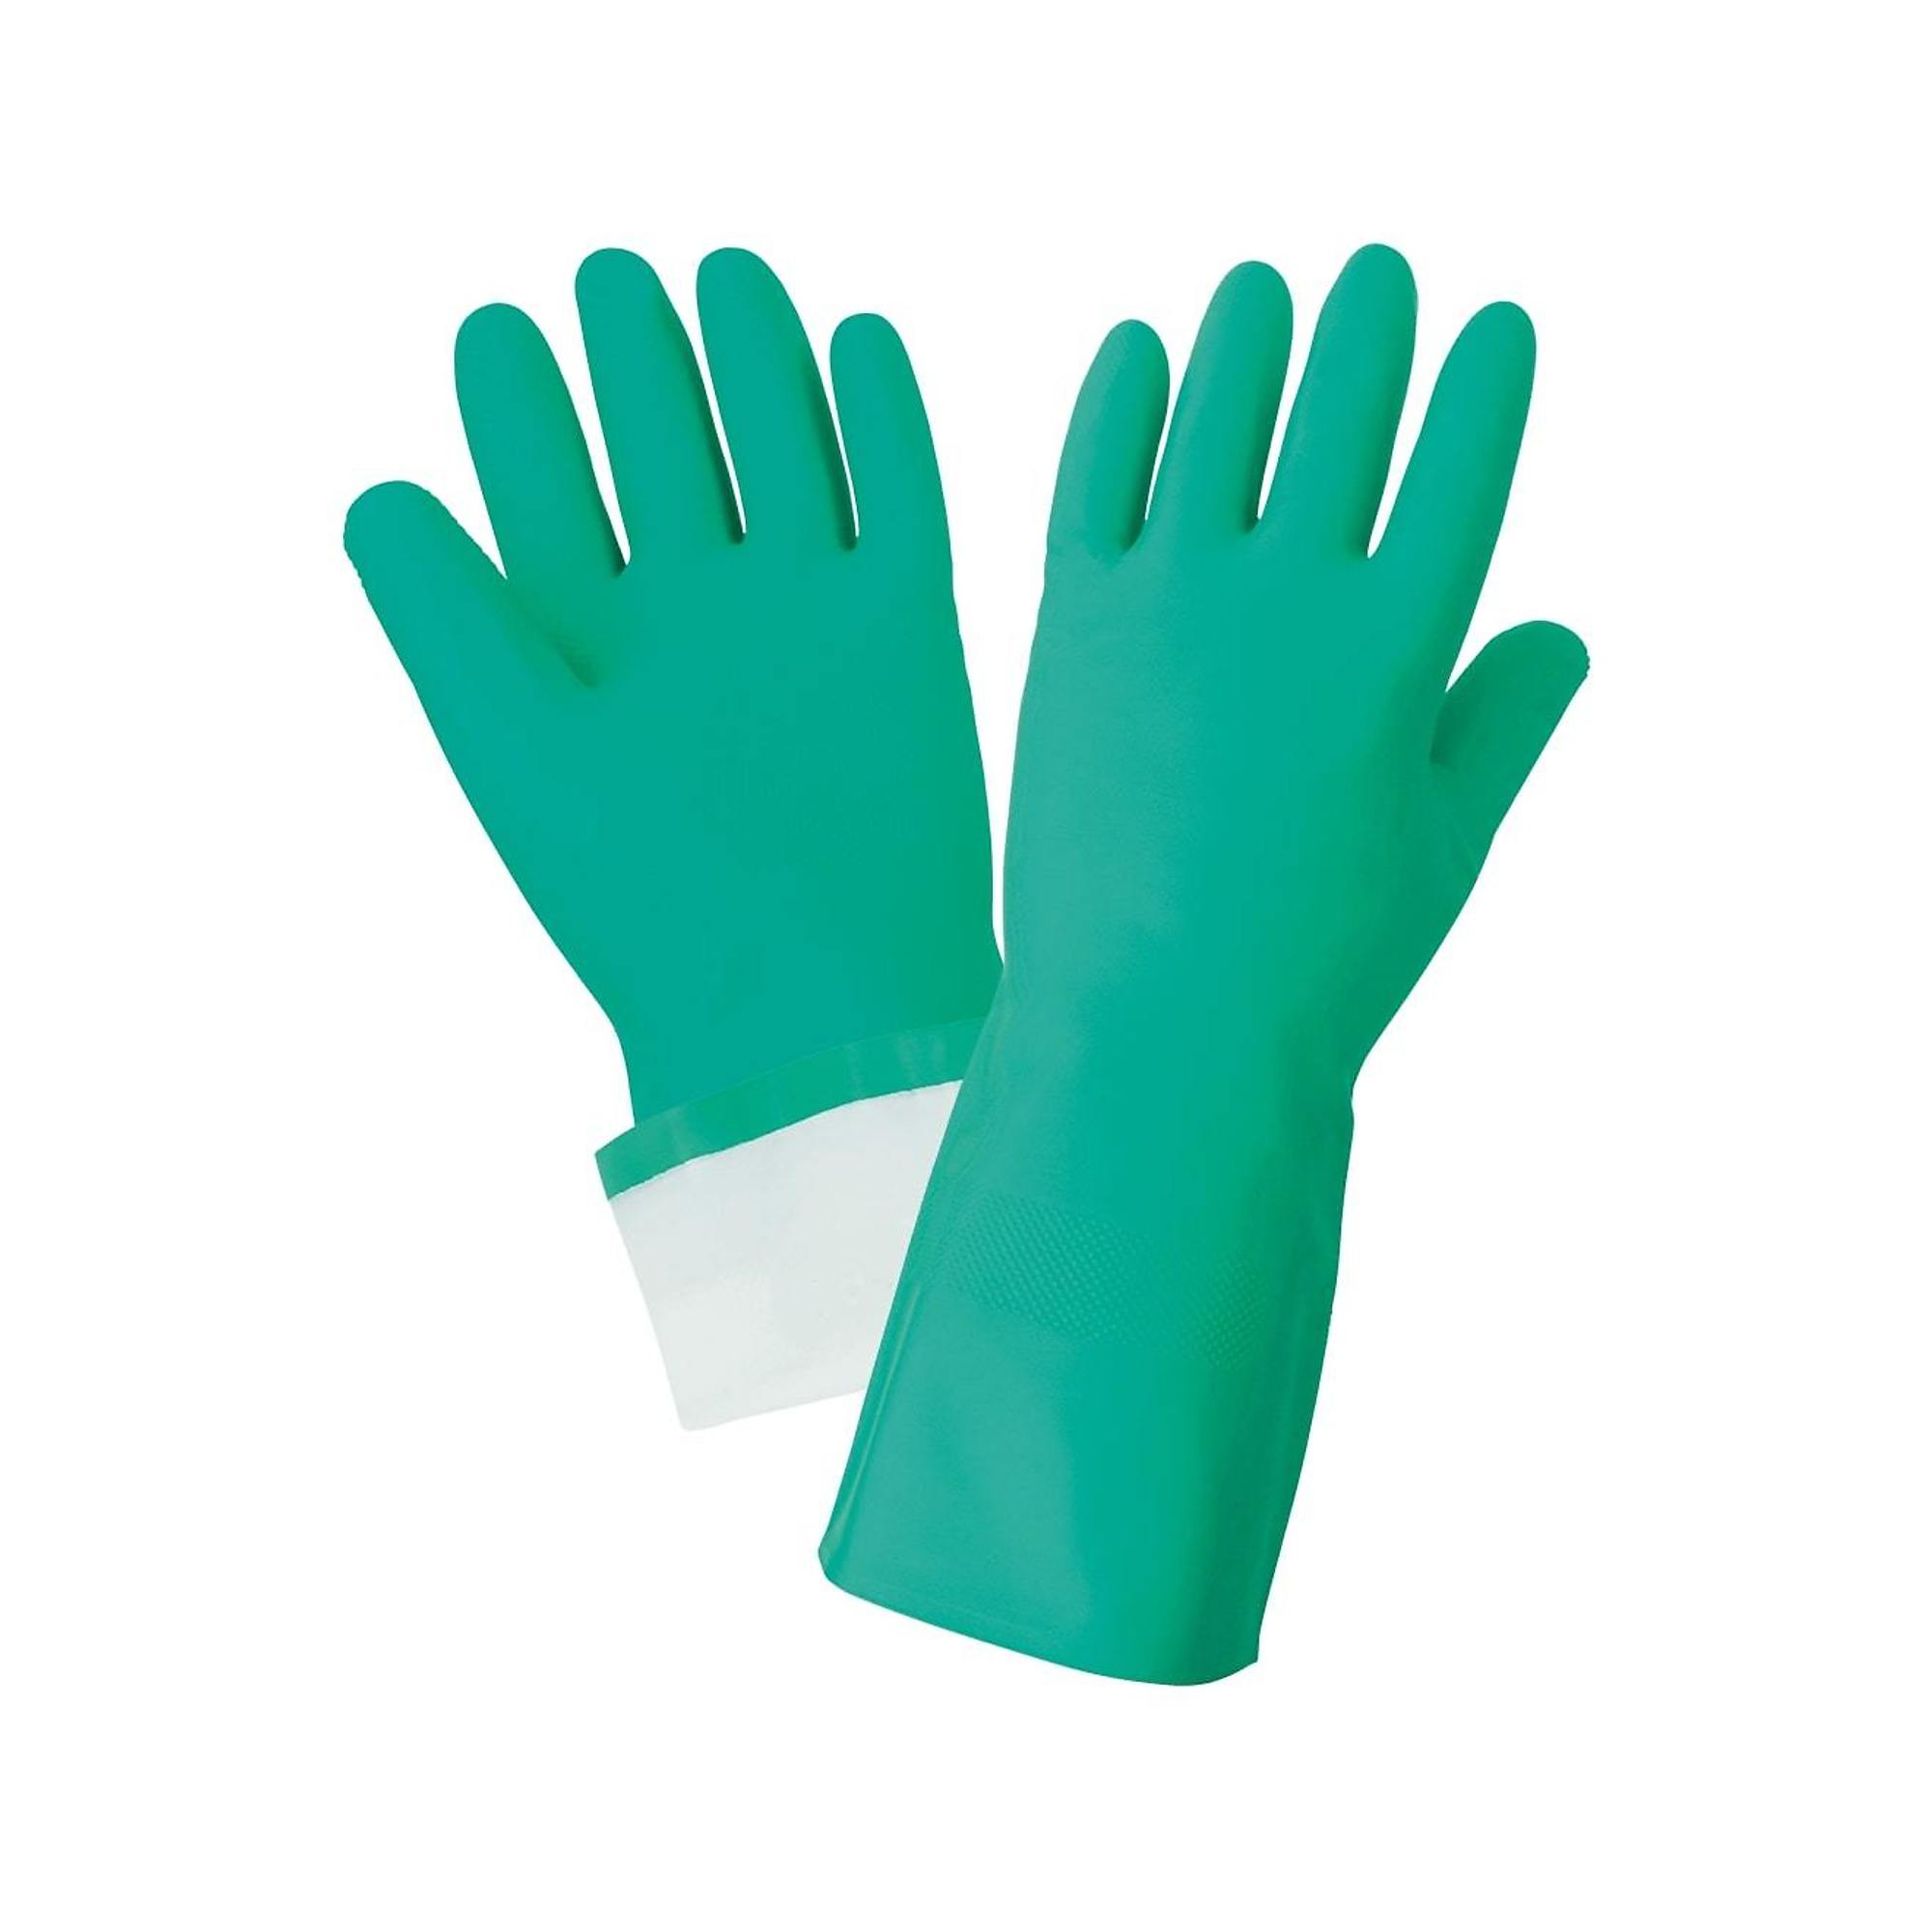 FrogWear, 15-Mil, 13Inch, Flock-Line Nitrile Diamond Grip Gloves-12 Pairs, Size 2XL, Color Green, Included (qty.) 12 Model 515F-11(2XL)